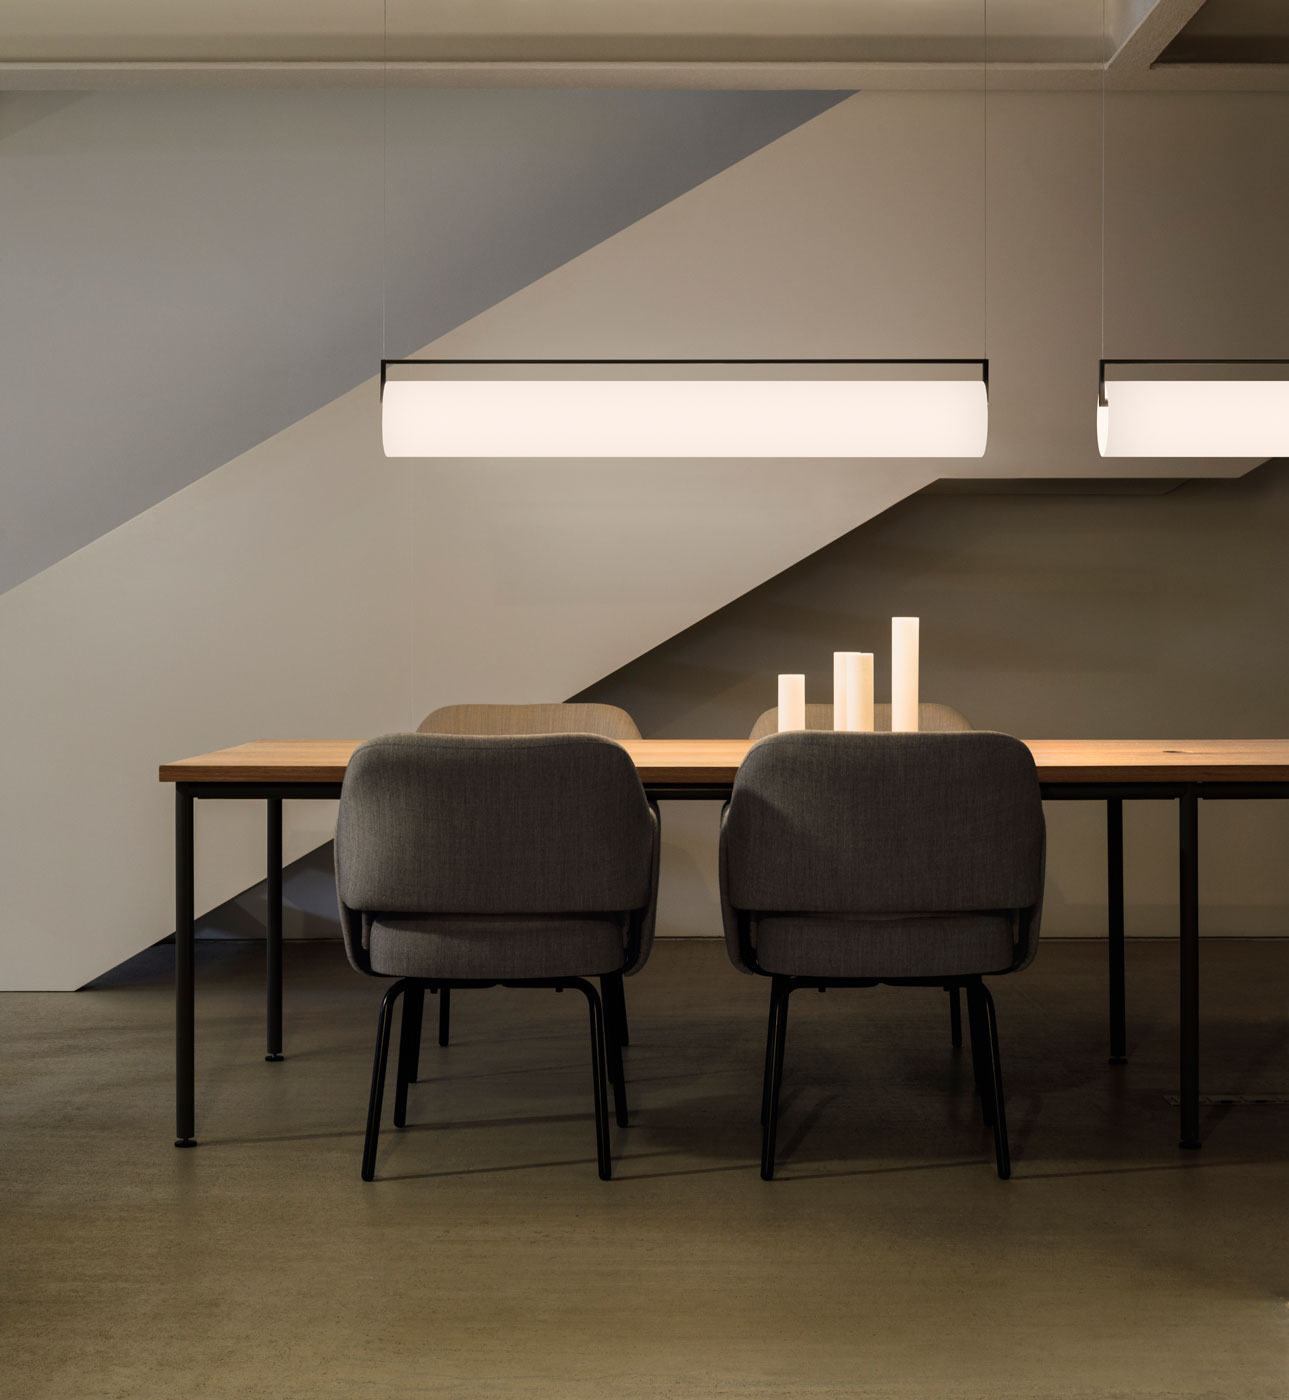 Vibia The Edit - Framing Light: Introducing the Kontur Collection